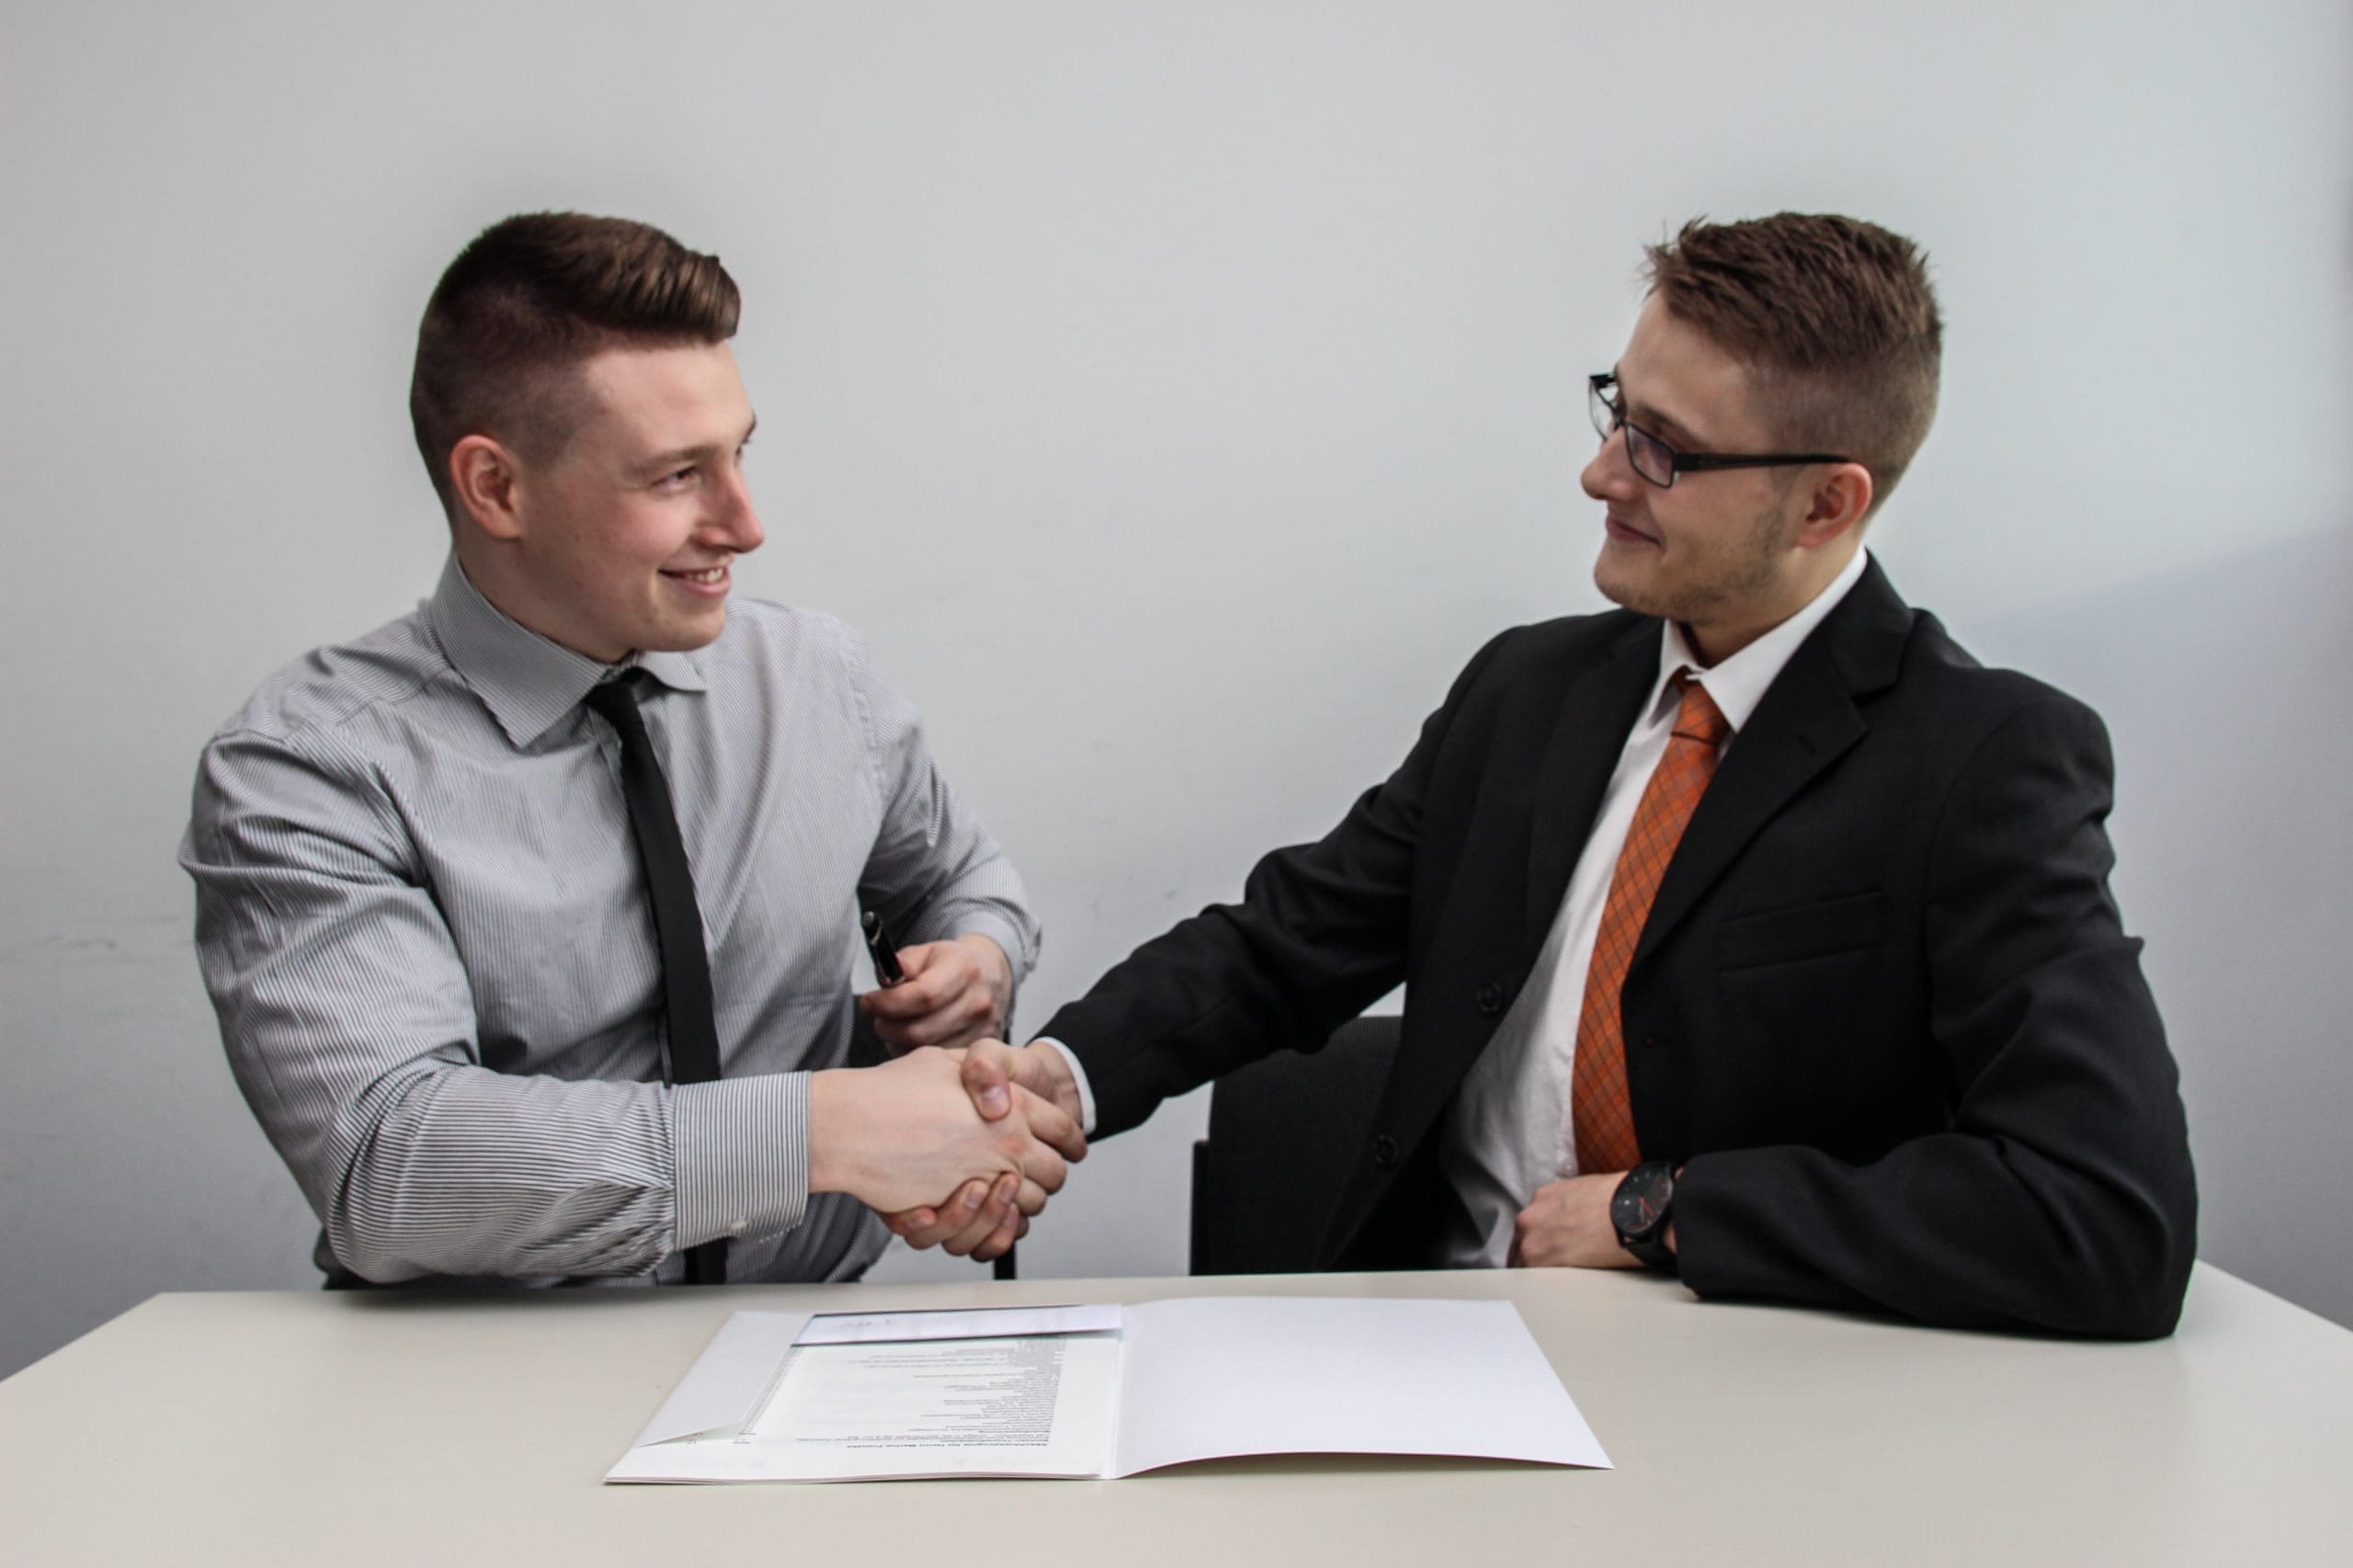 business partnership two men facing each other while shake hands and smiling